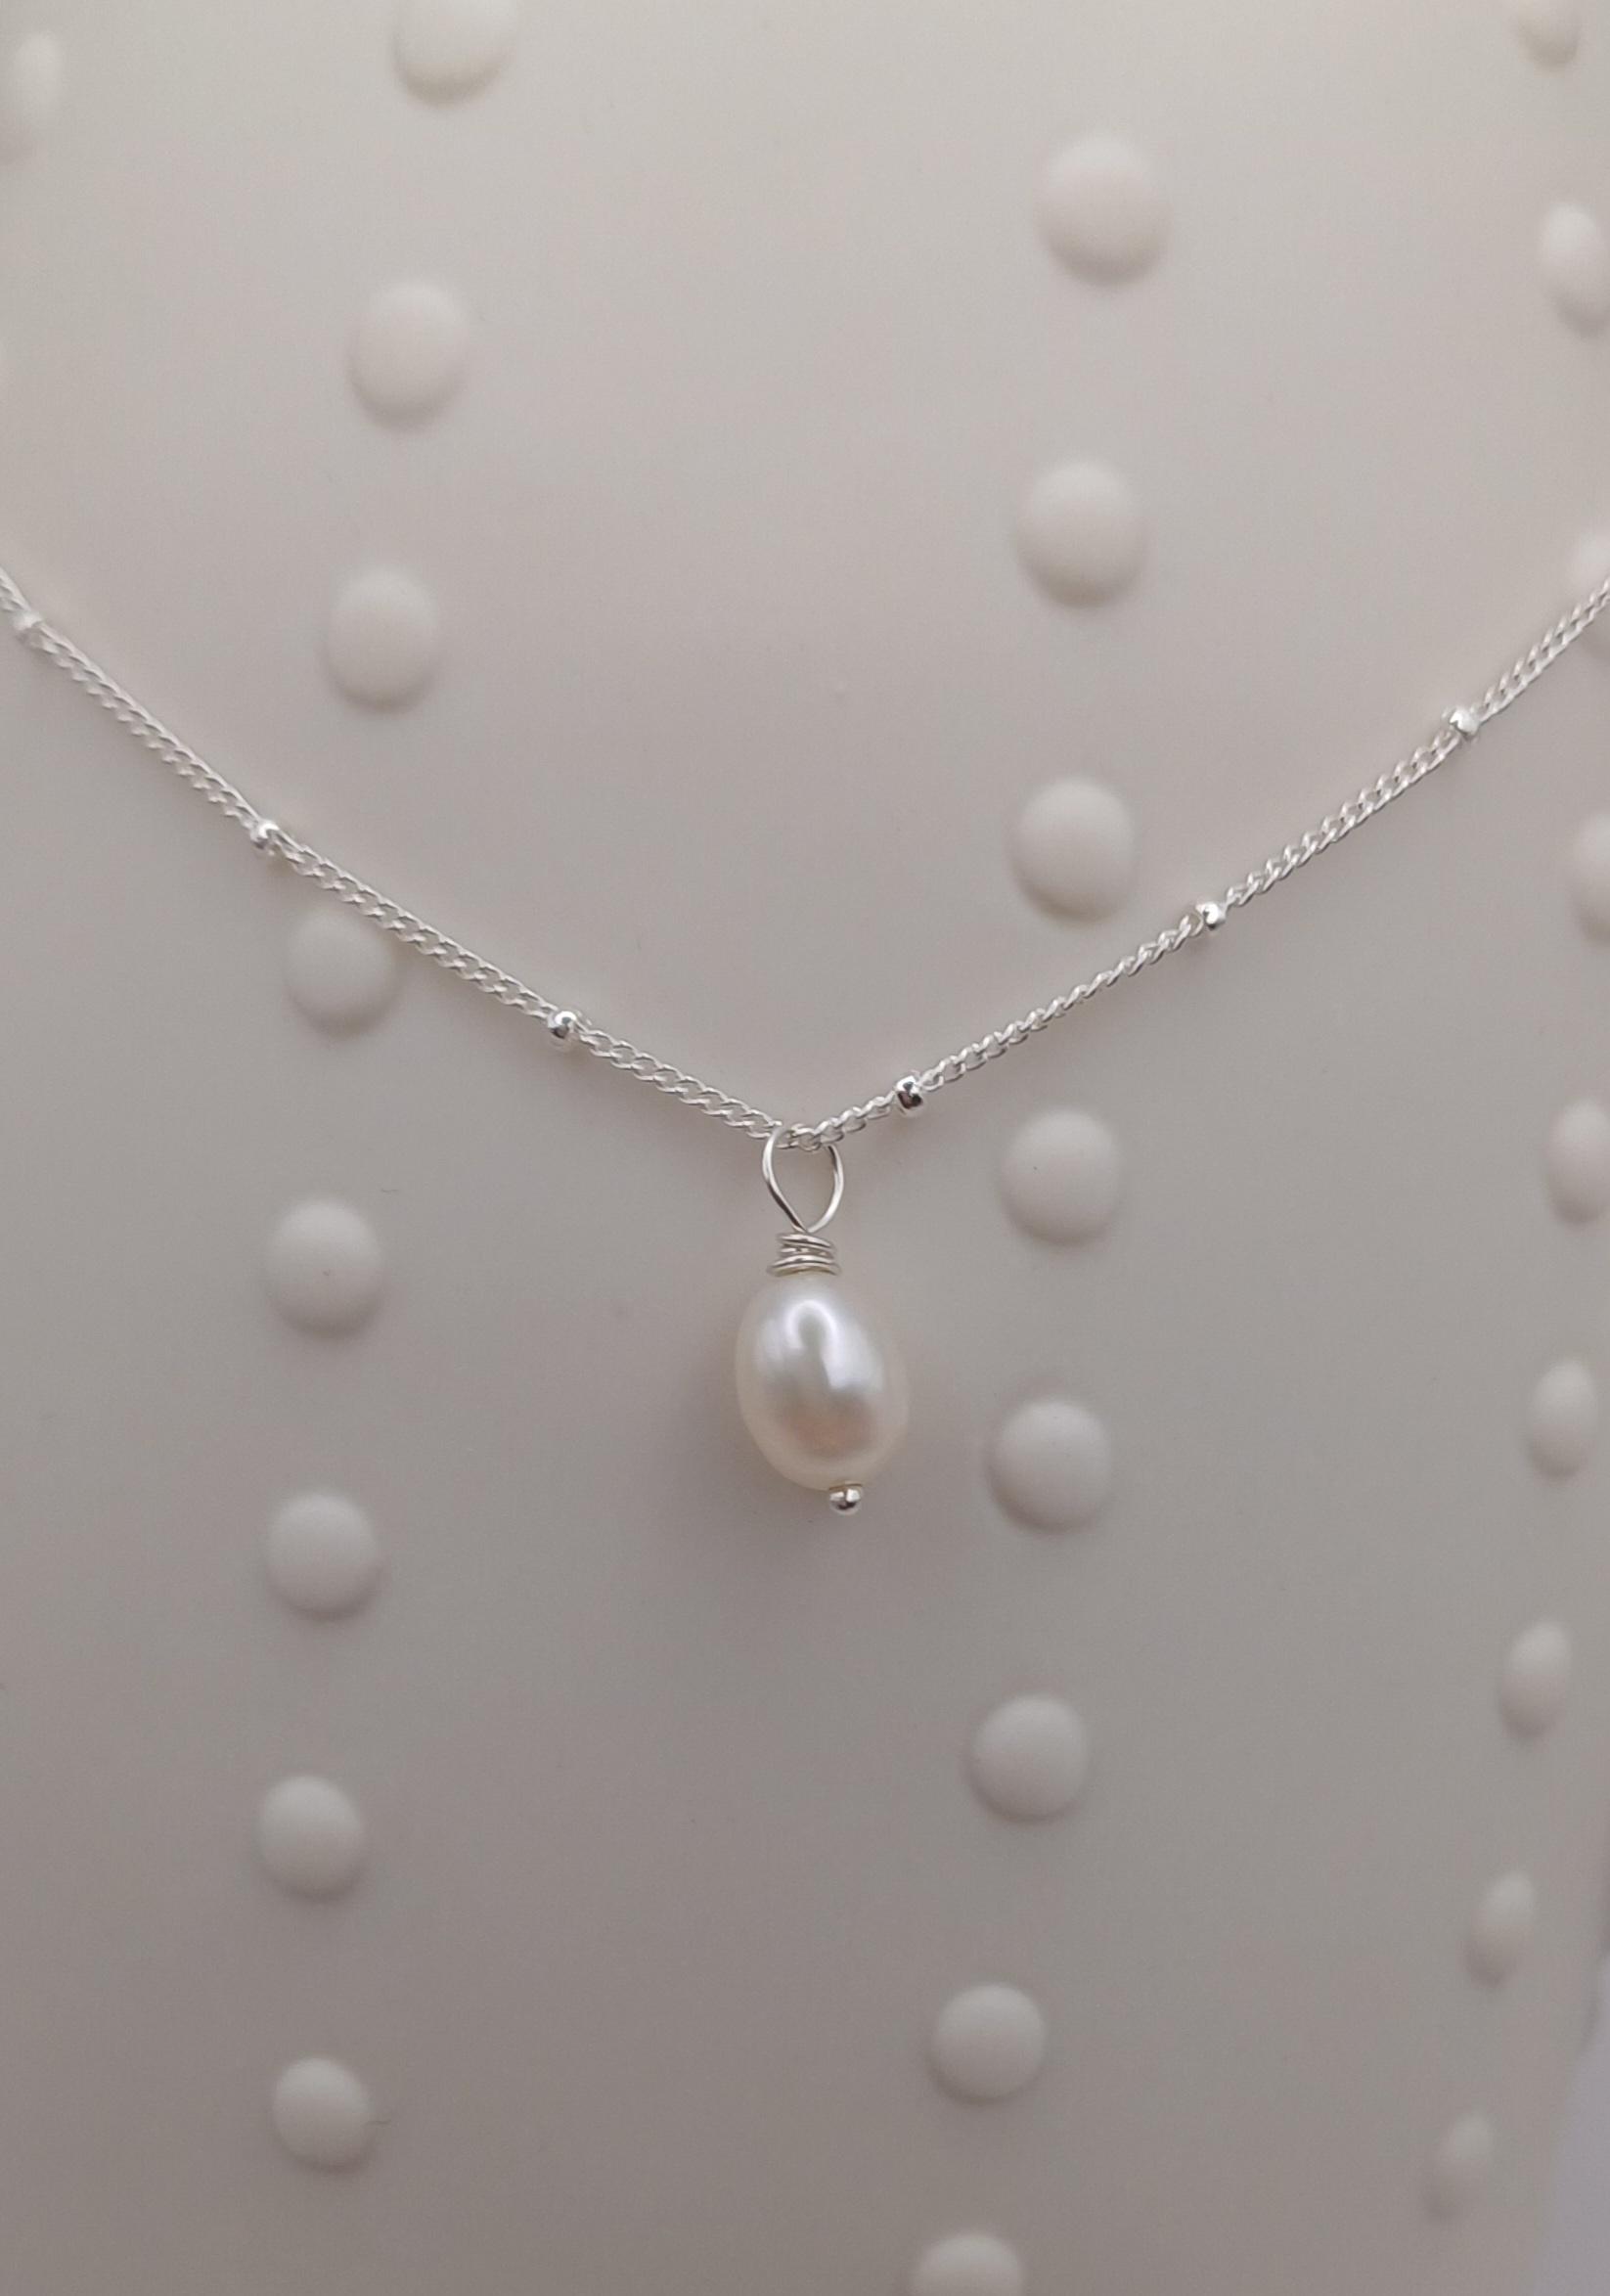 NECKLACES - Sterling Silver Dainty Pearl Necklace